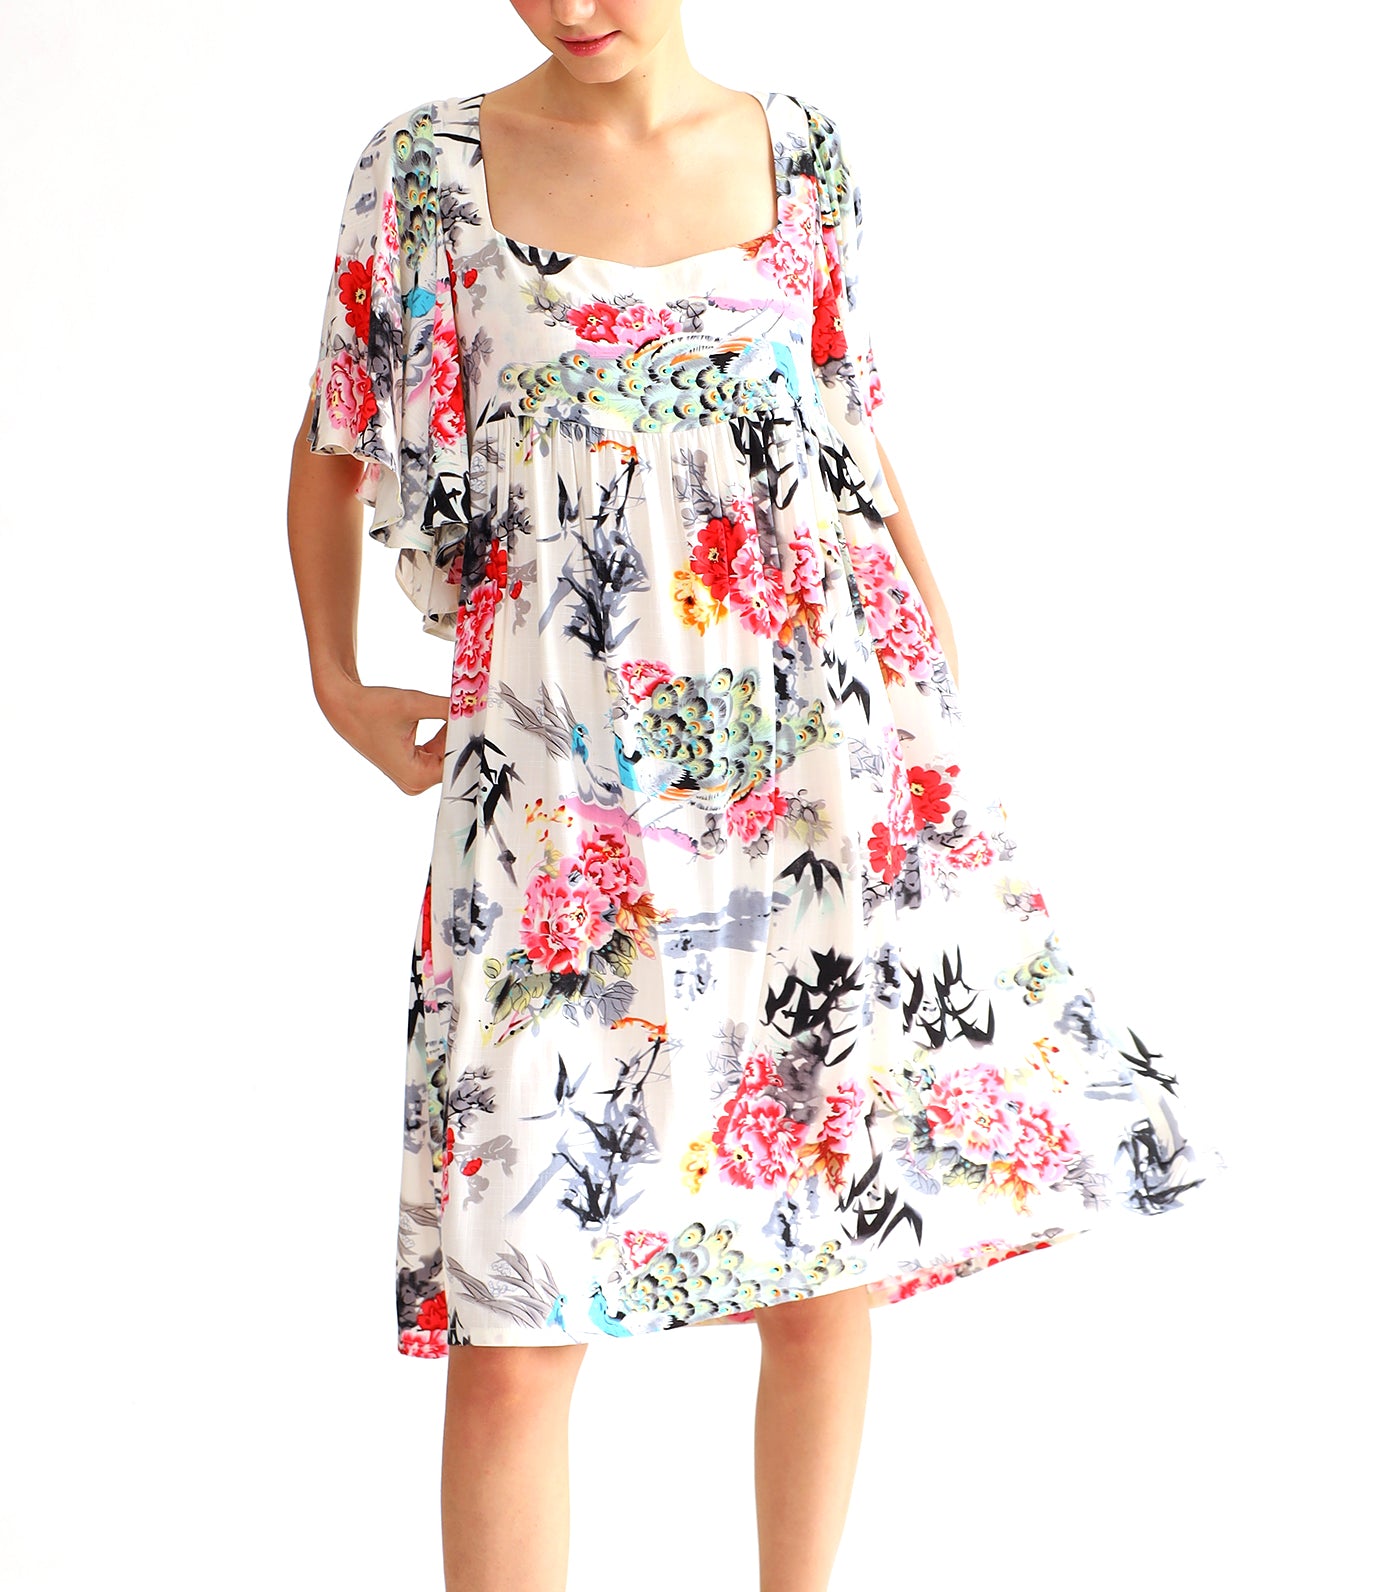 Ally Housedress Floral Print Multi